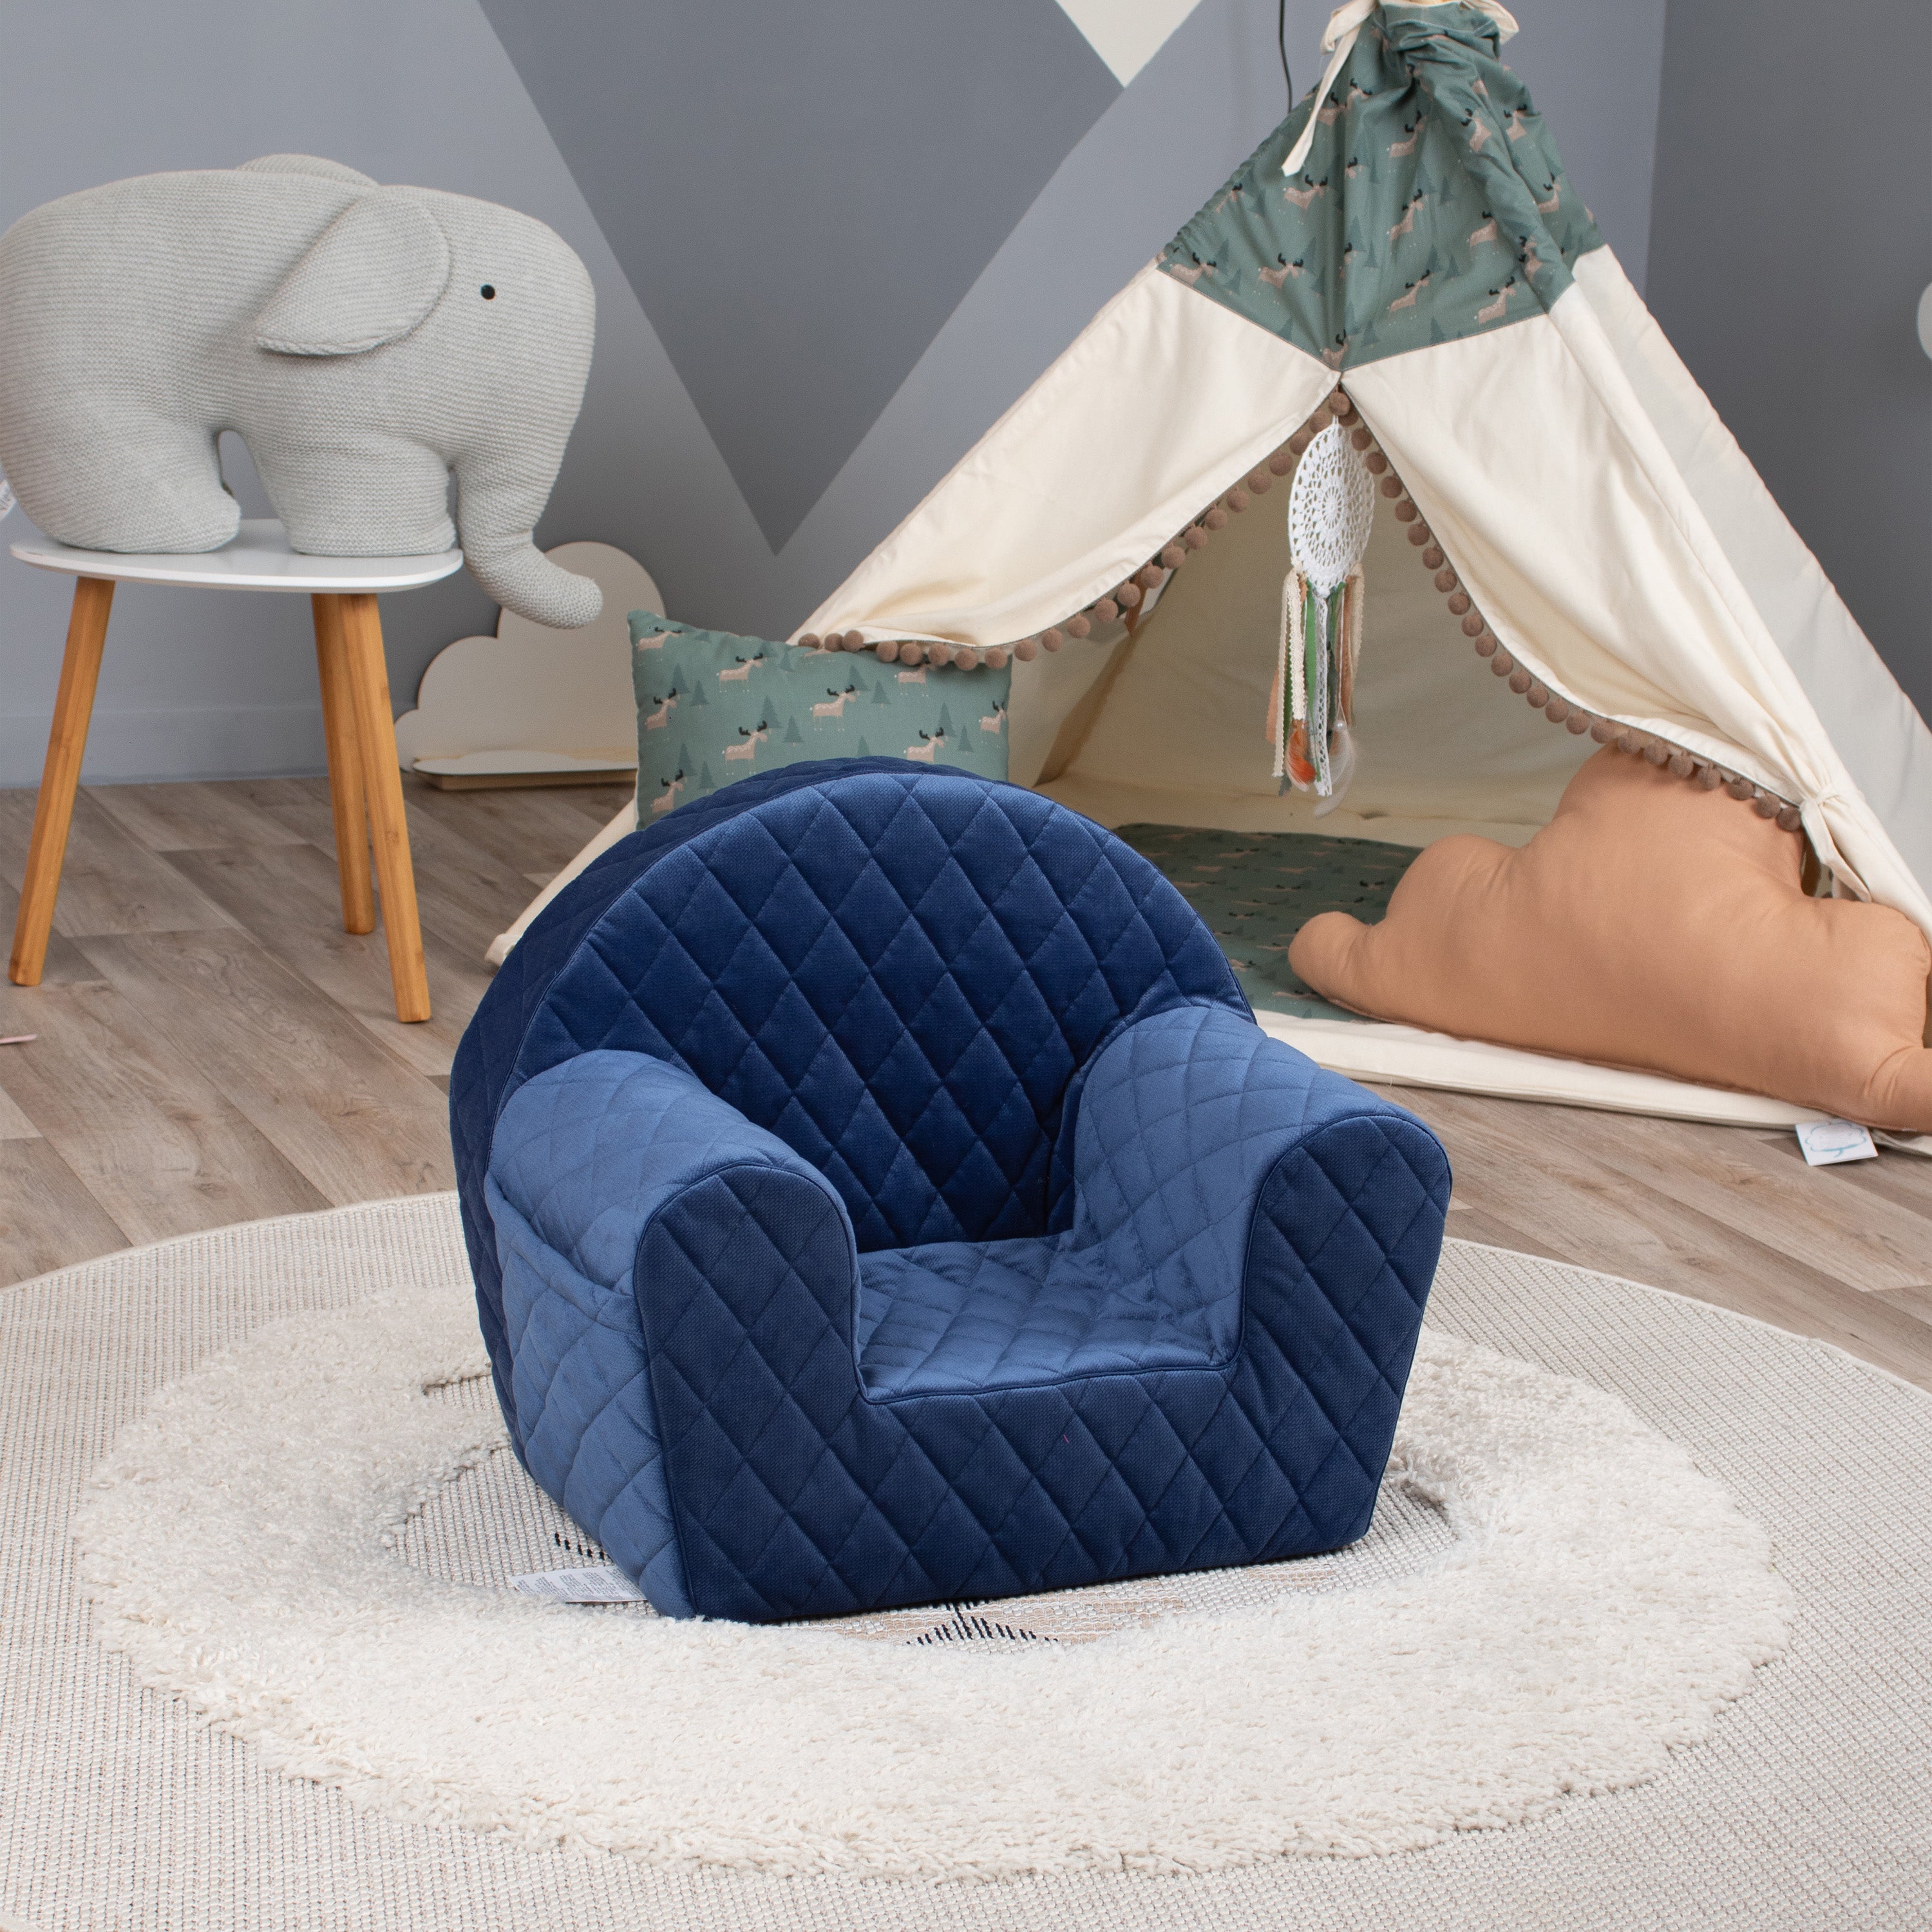 DELSIT Toddler Chair & Kids Armchair - Quilted Diamonds Azure